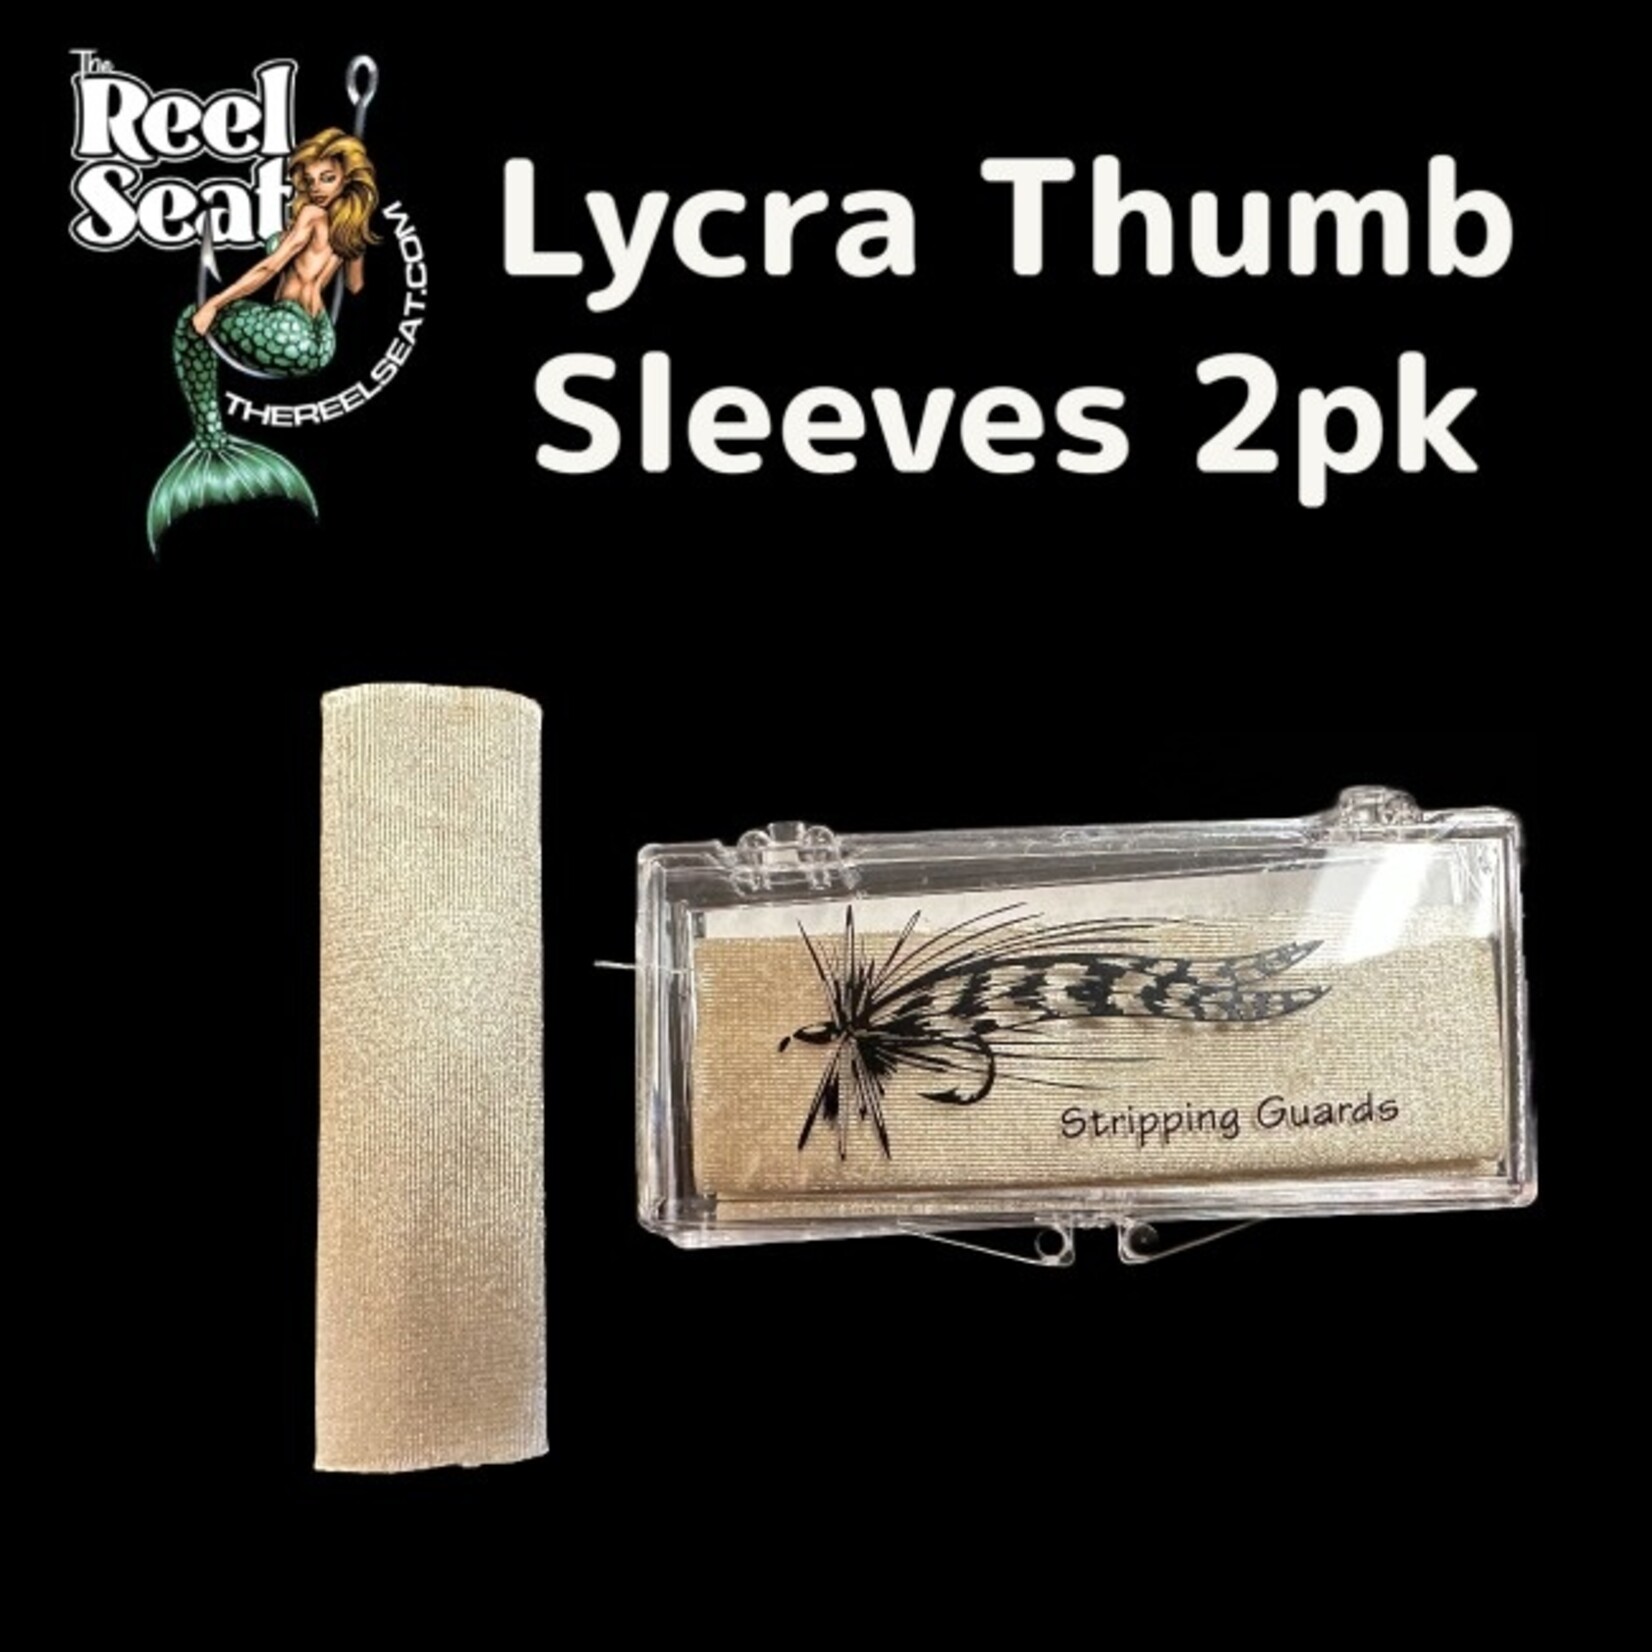 Lycra Thumb Sleeves gold/silver